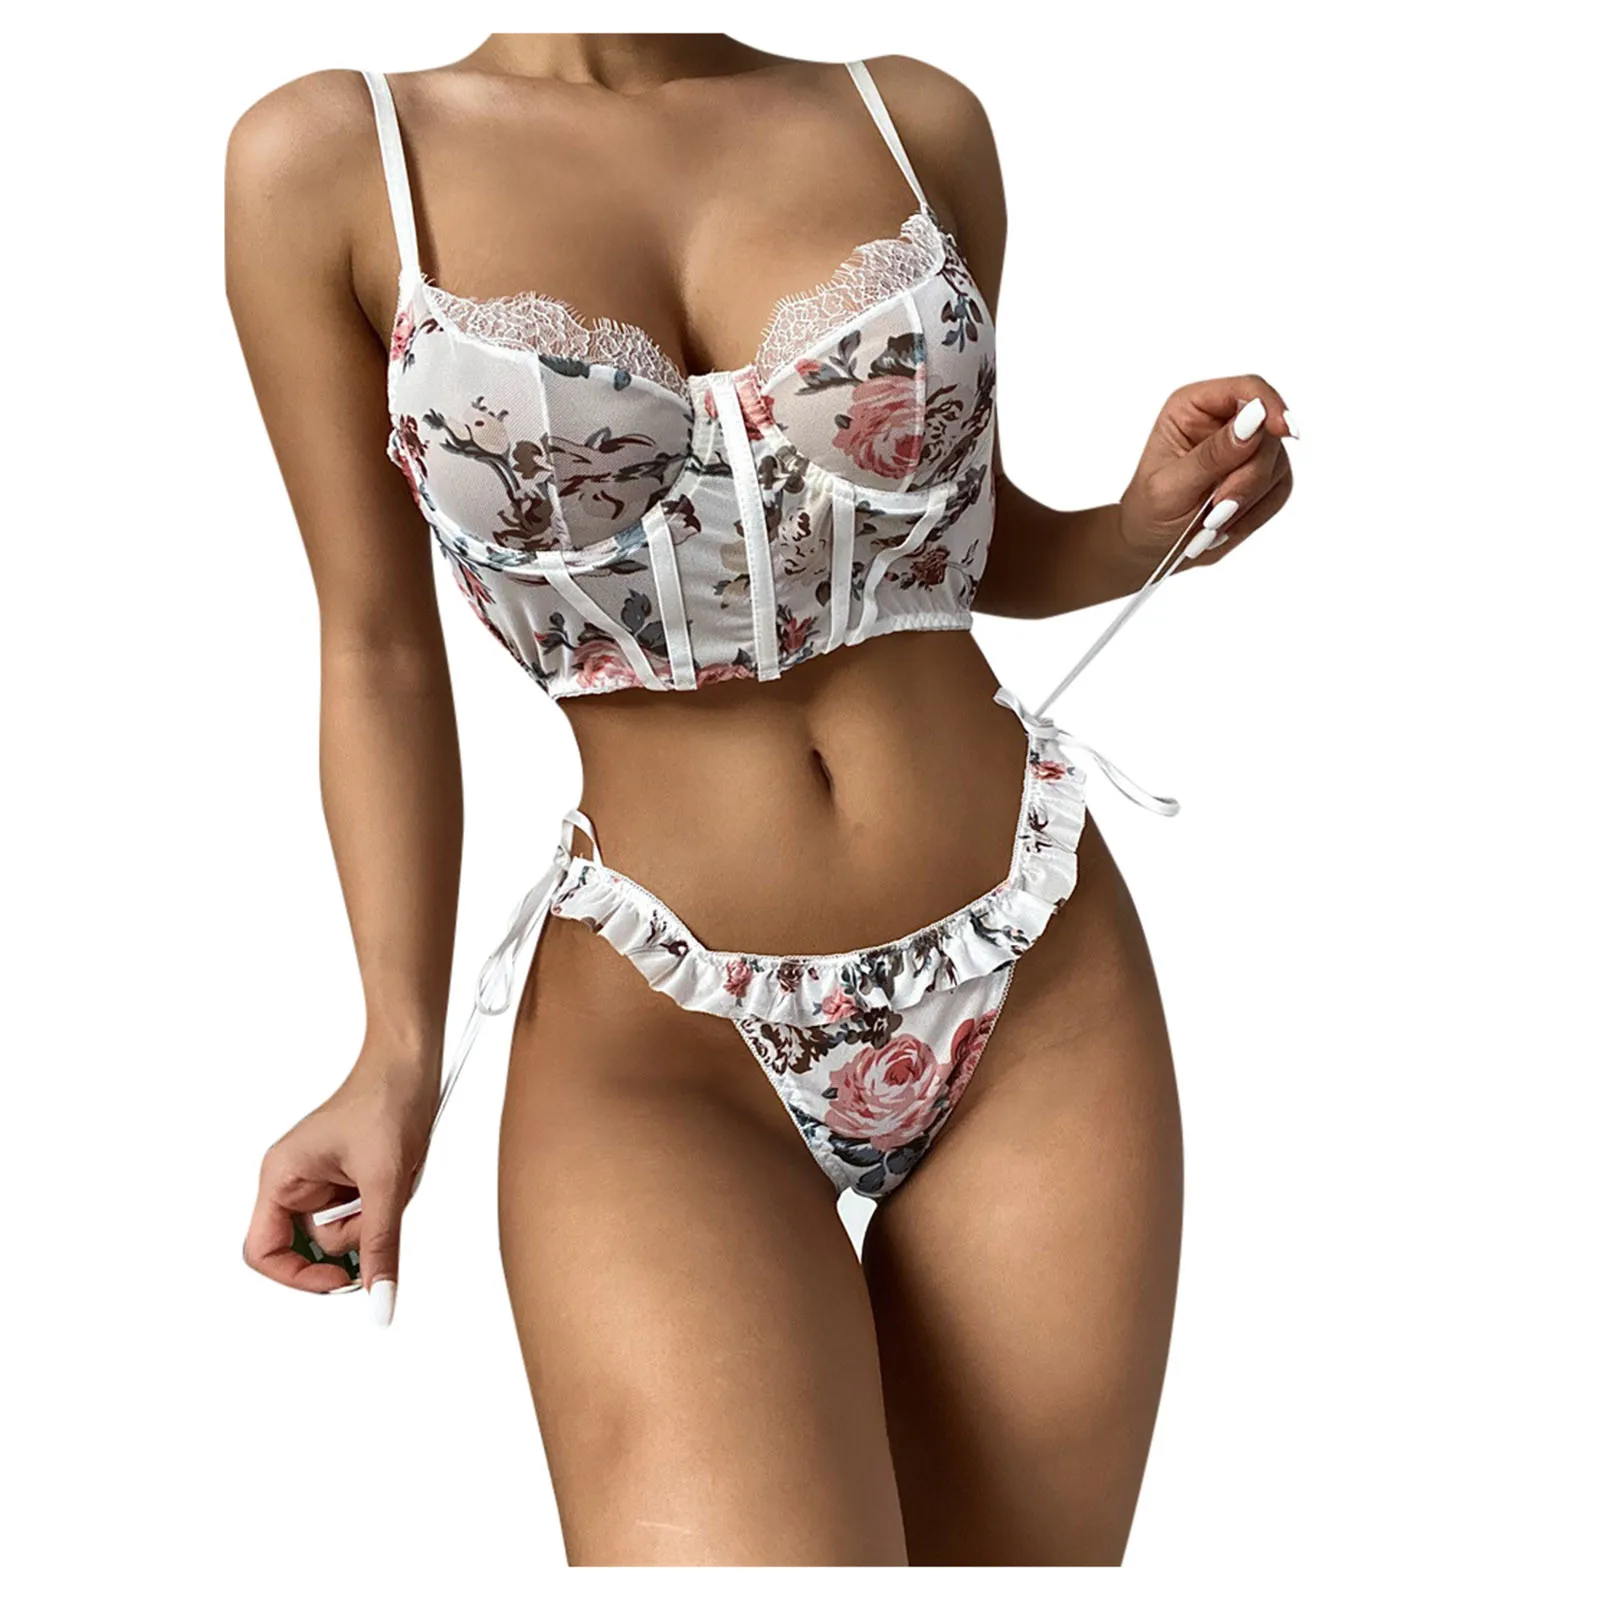 

Perspective Floral Bra And Thongs Set Sexy Lace Lingerie Women Underwear Set Lenceria Sensual Mujer Babydoll Hot Erotic Costumes